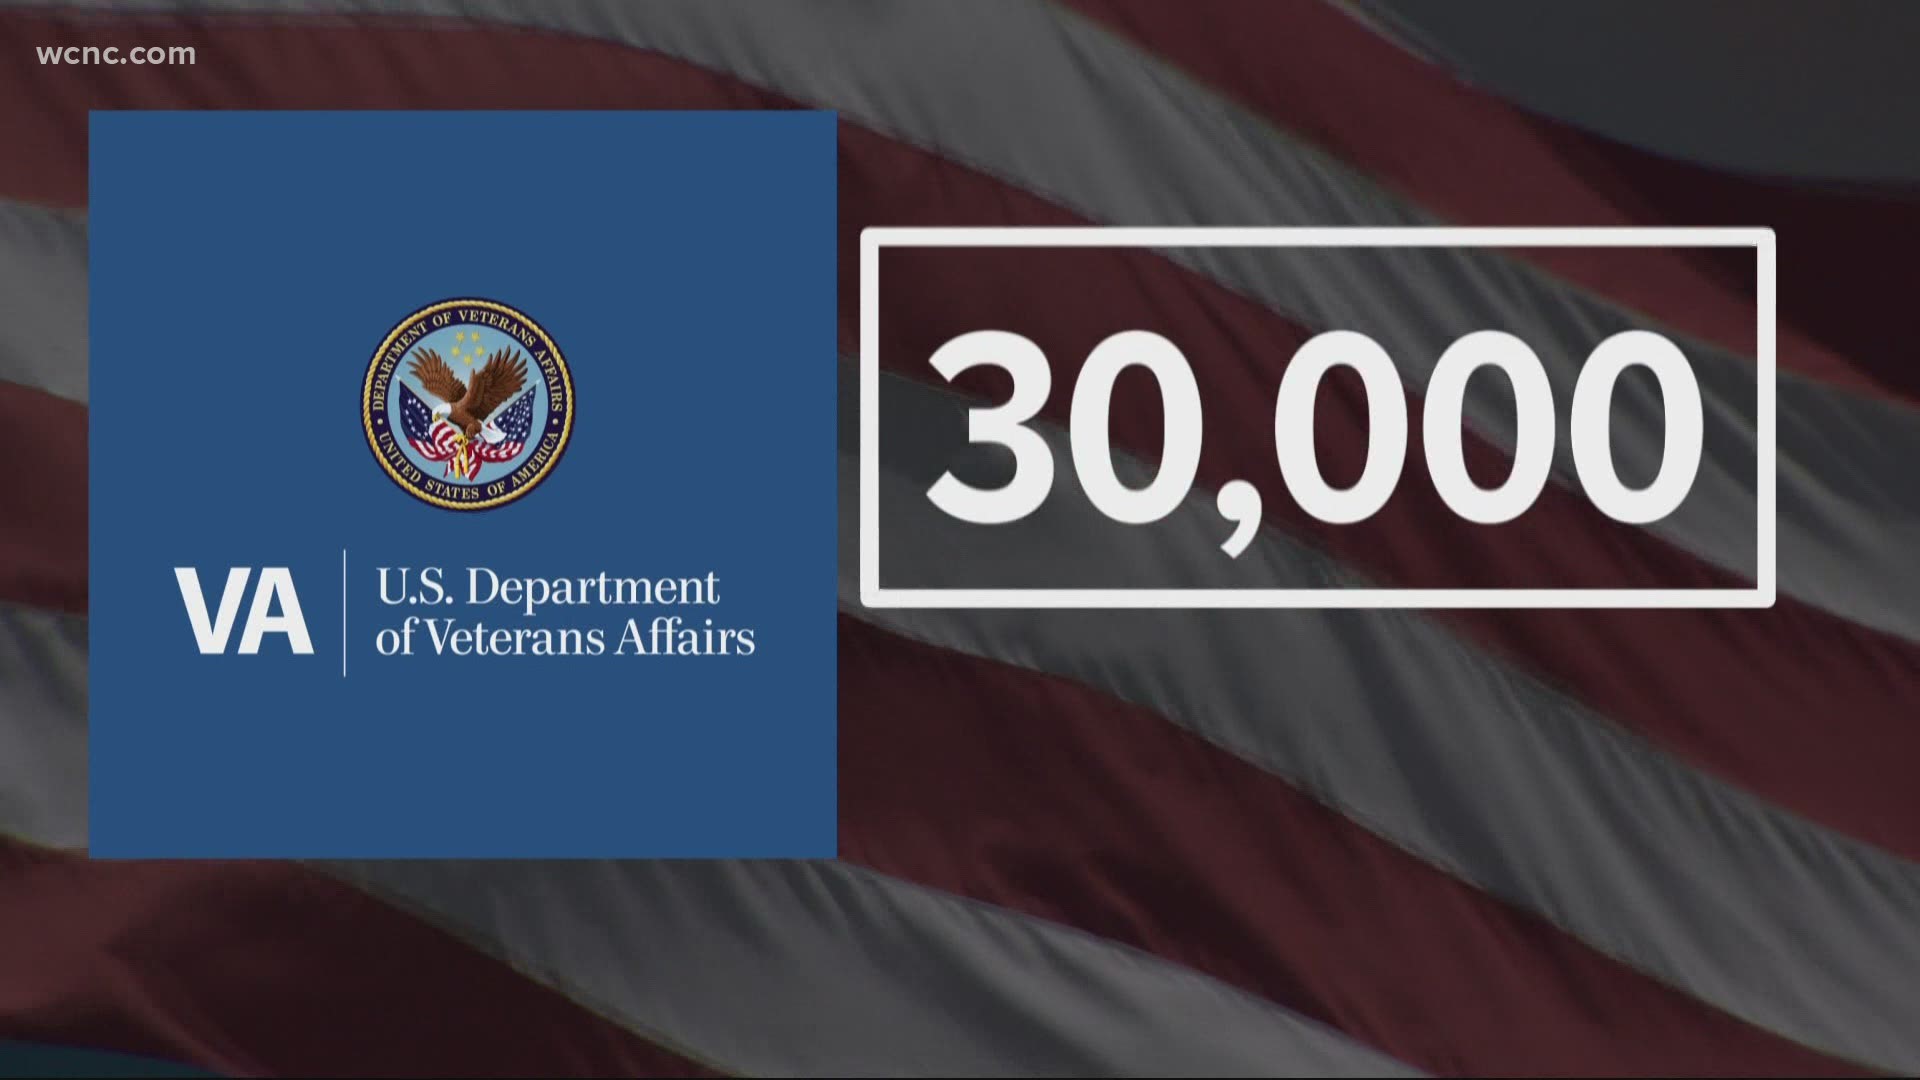 In late March, area veterans waited on 30,000 unpaid travel claims. In the weeks since WCNC Charlotte started asking questions, the VA has cut the backlog in half.